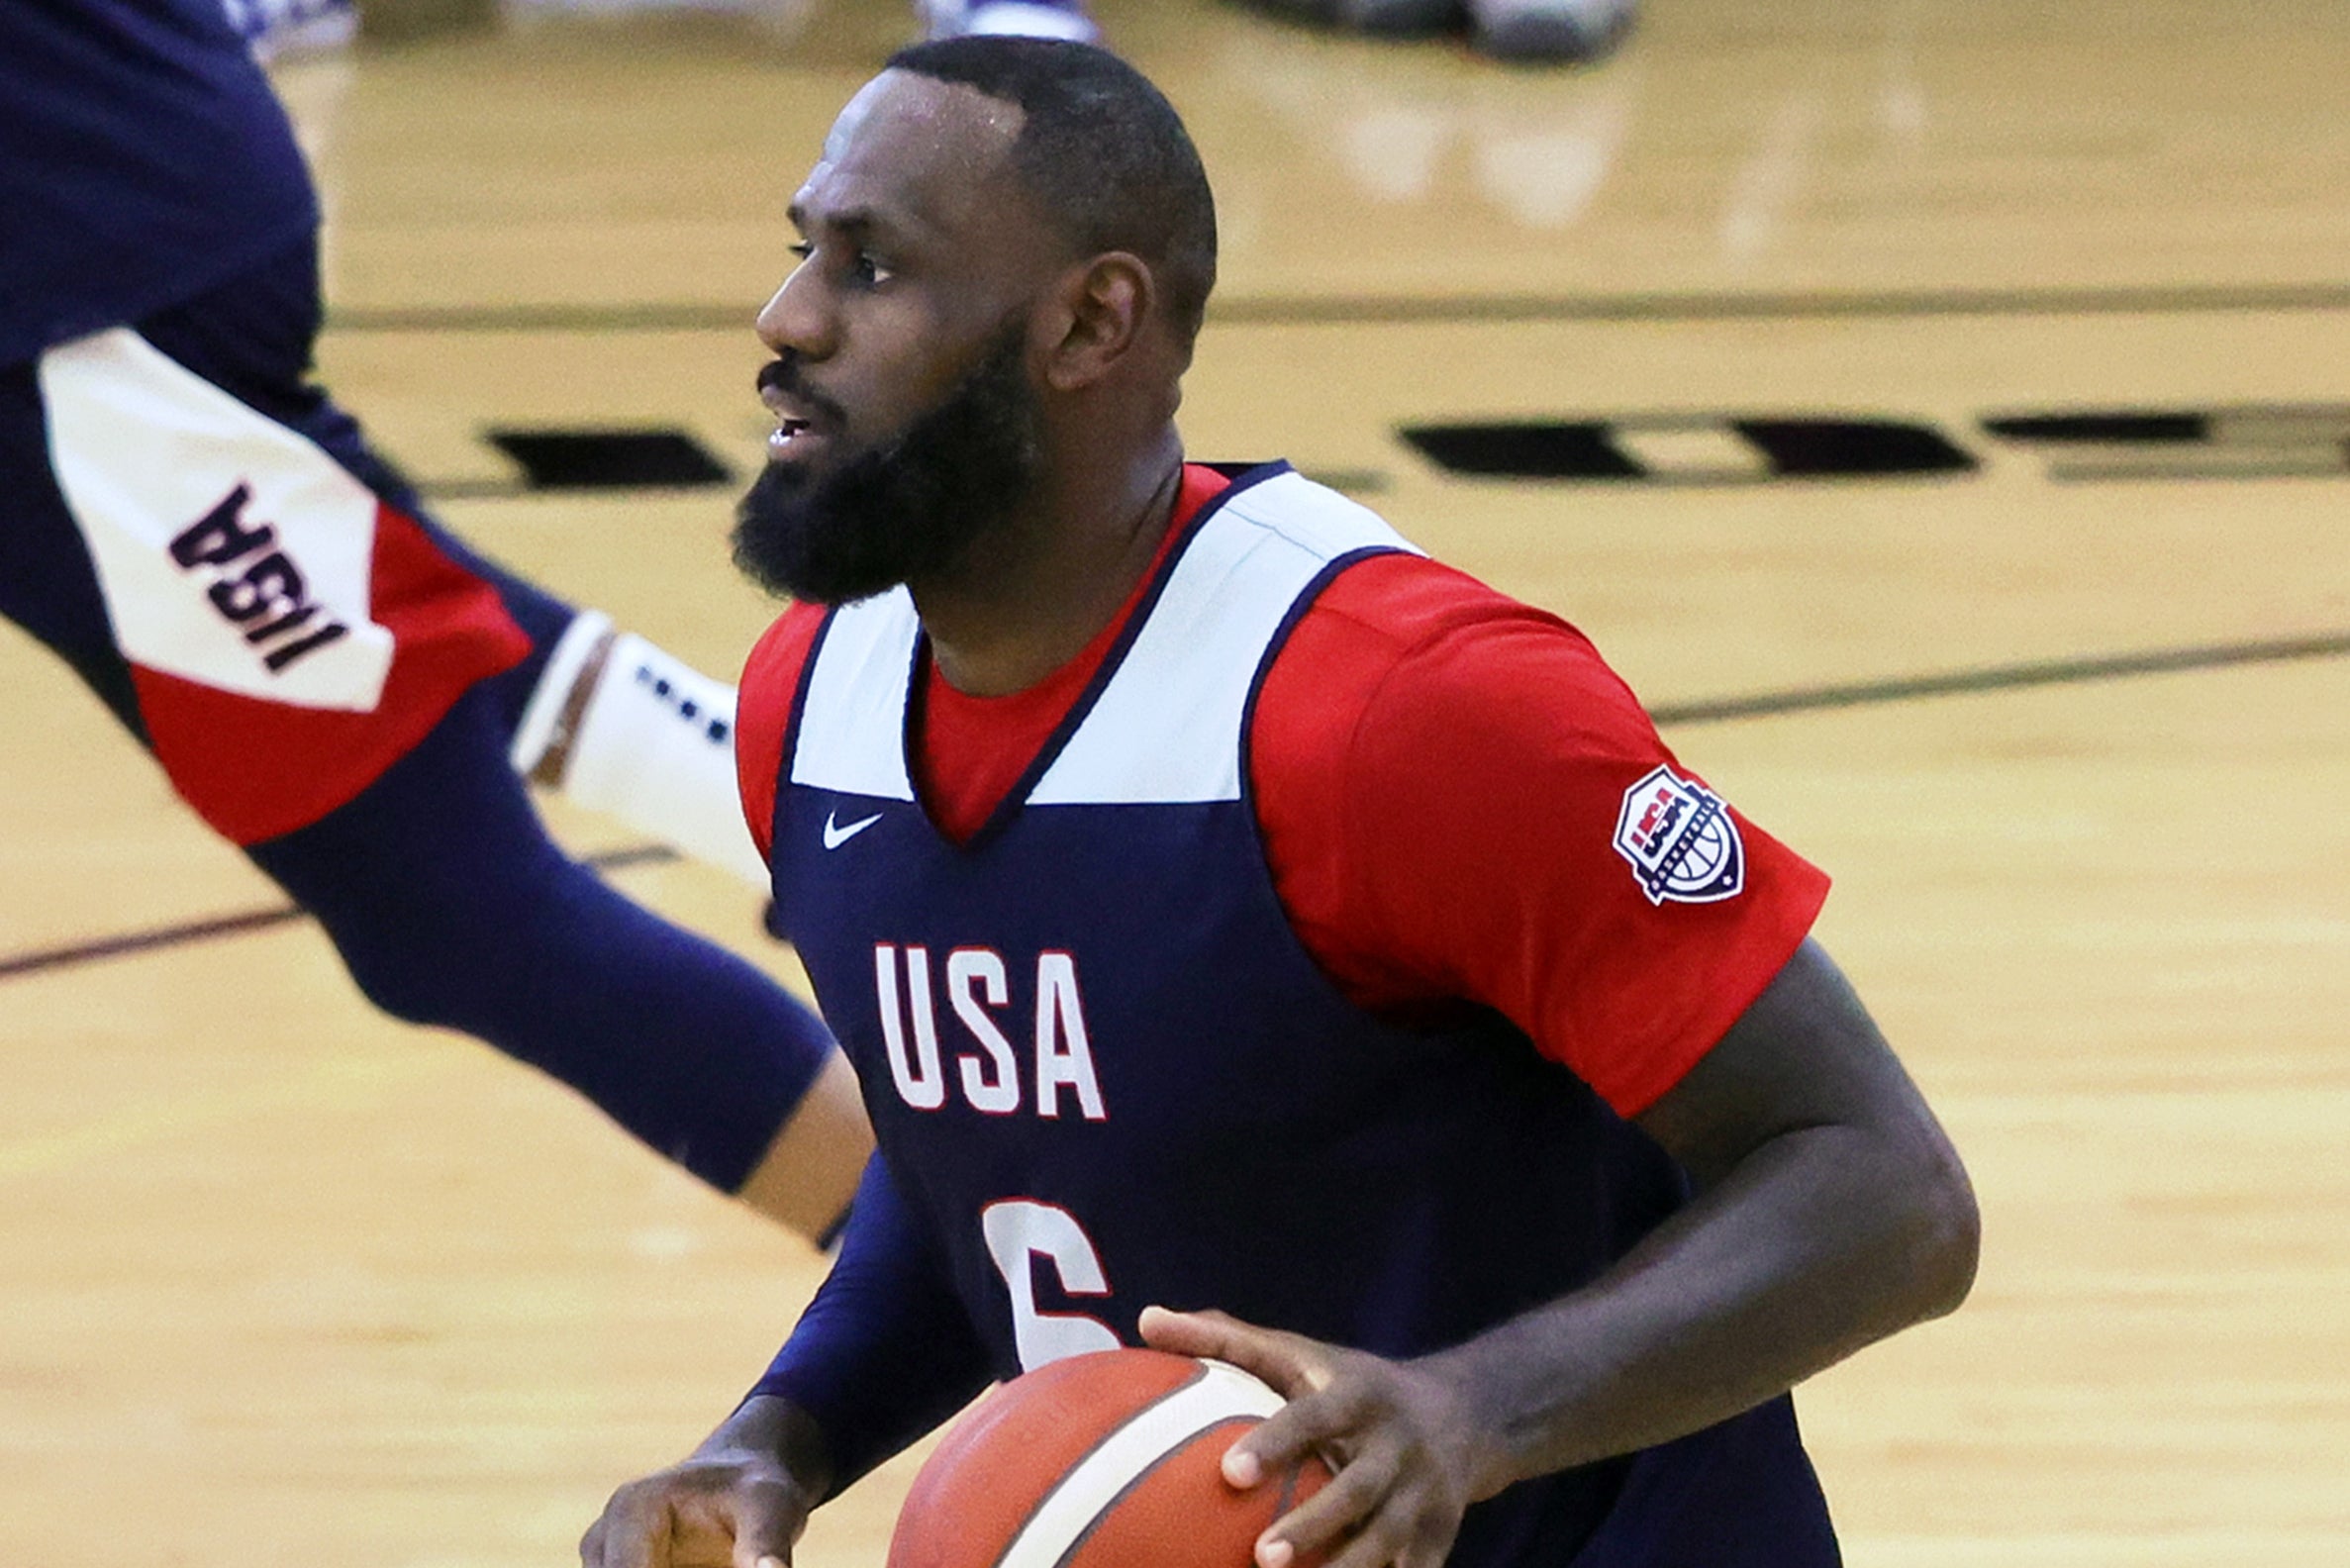 LeBron James is seeking a third Olympic gold medal with Team USA